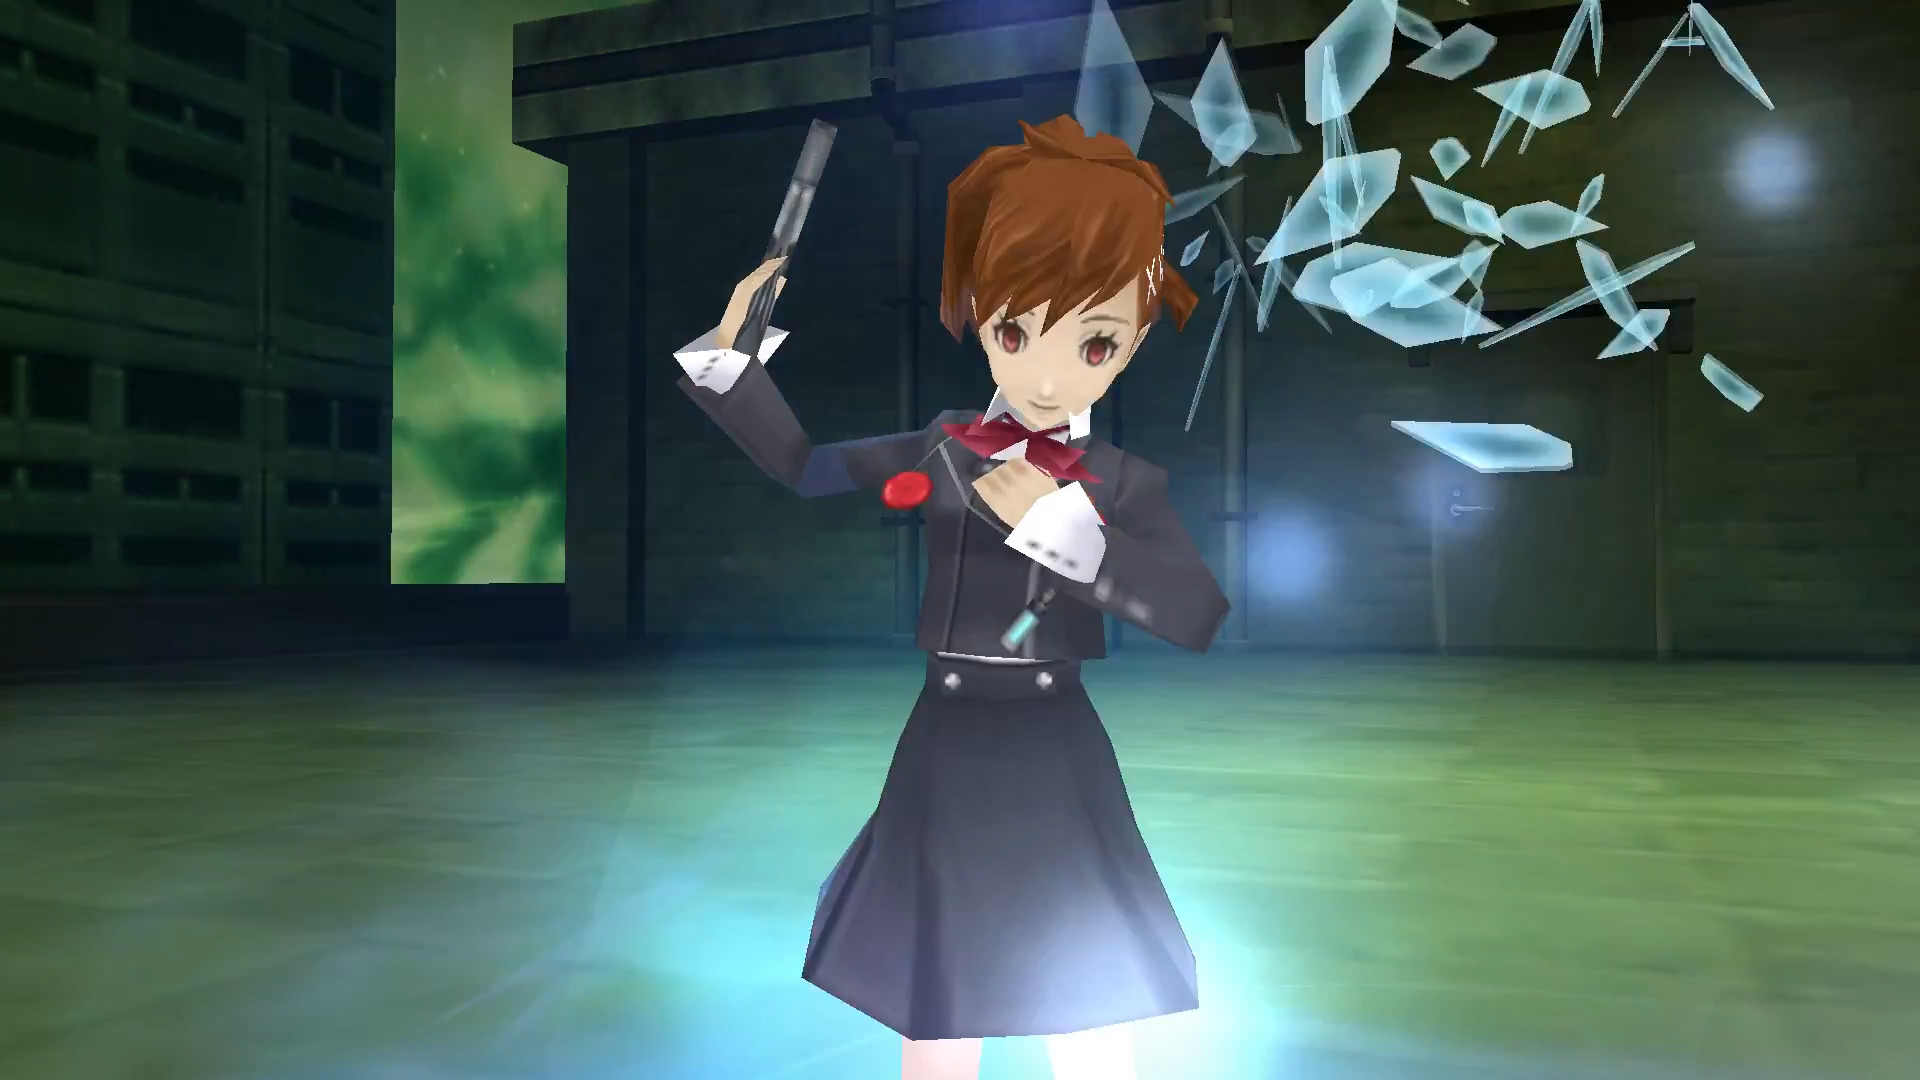 Kotone Shiomi (Maria Inoue) unlocks her Persona Orpheus for the first time in Persona 3 Portable (2009), Atlus